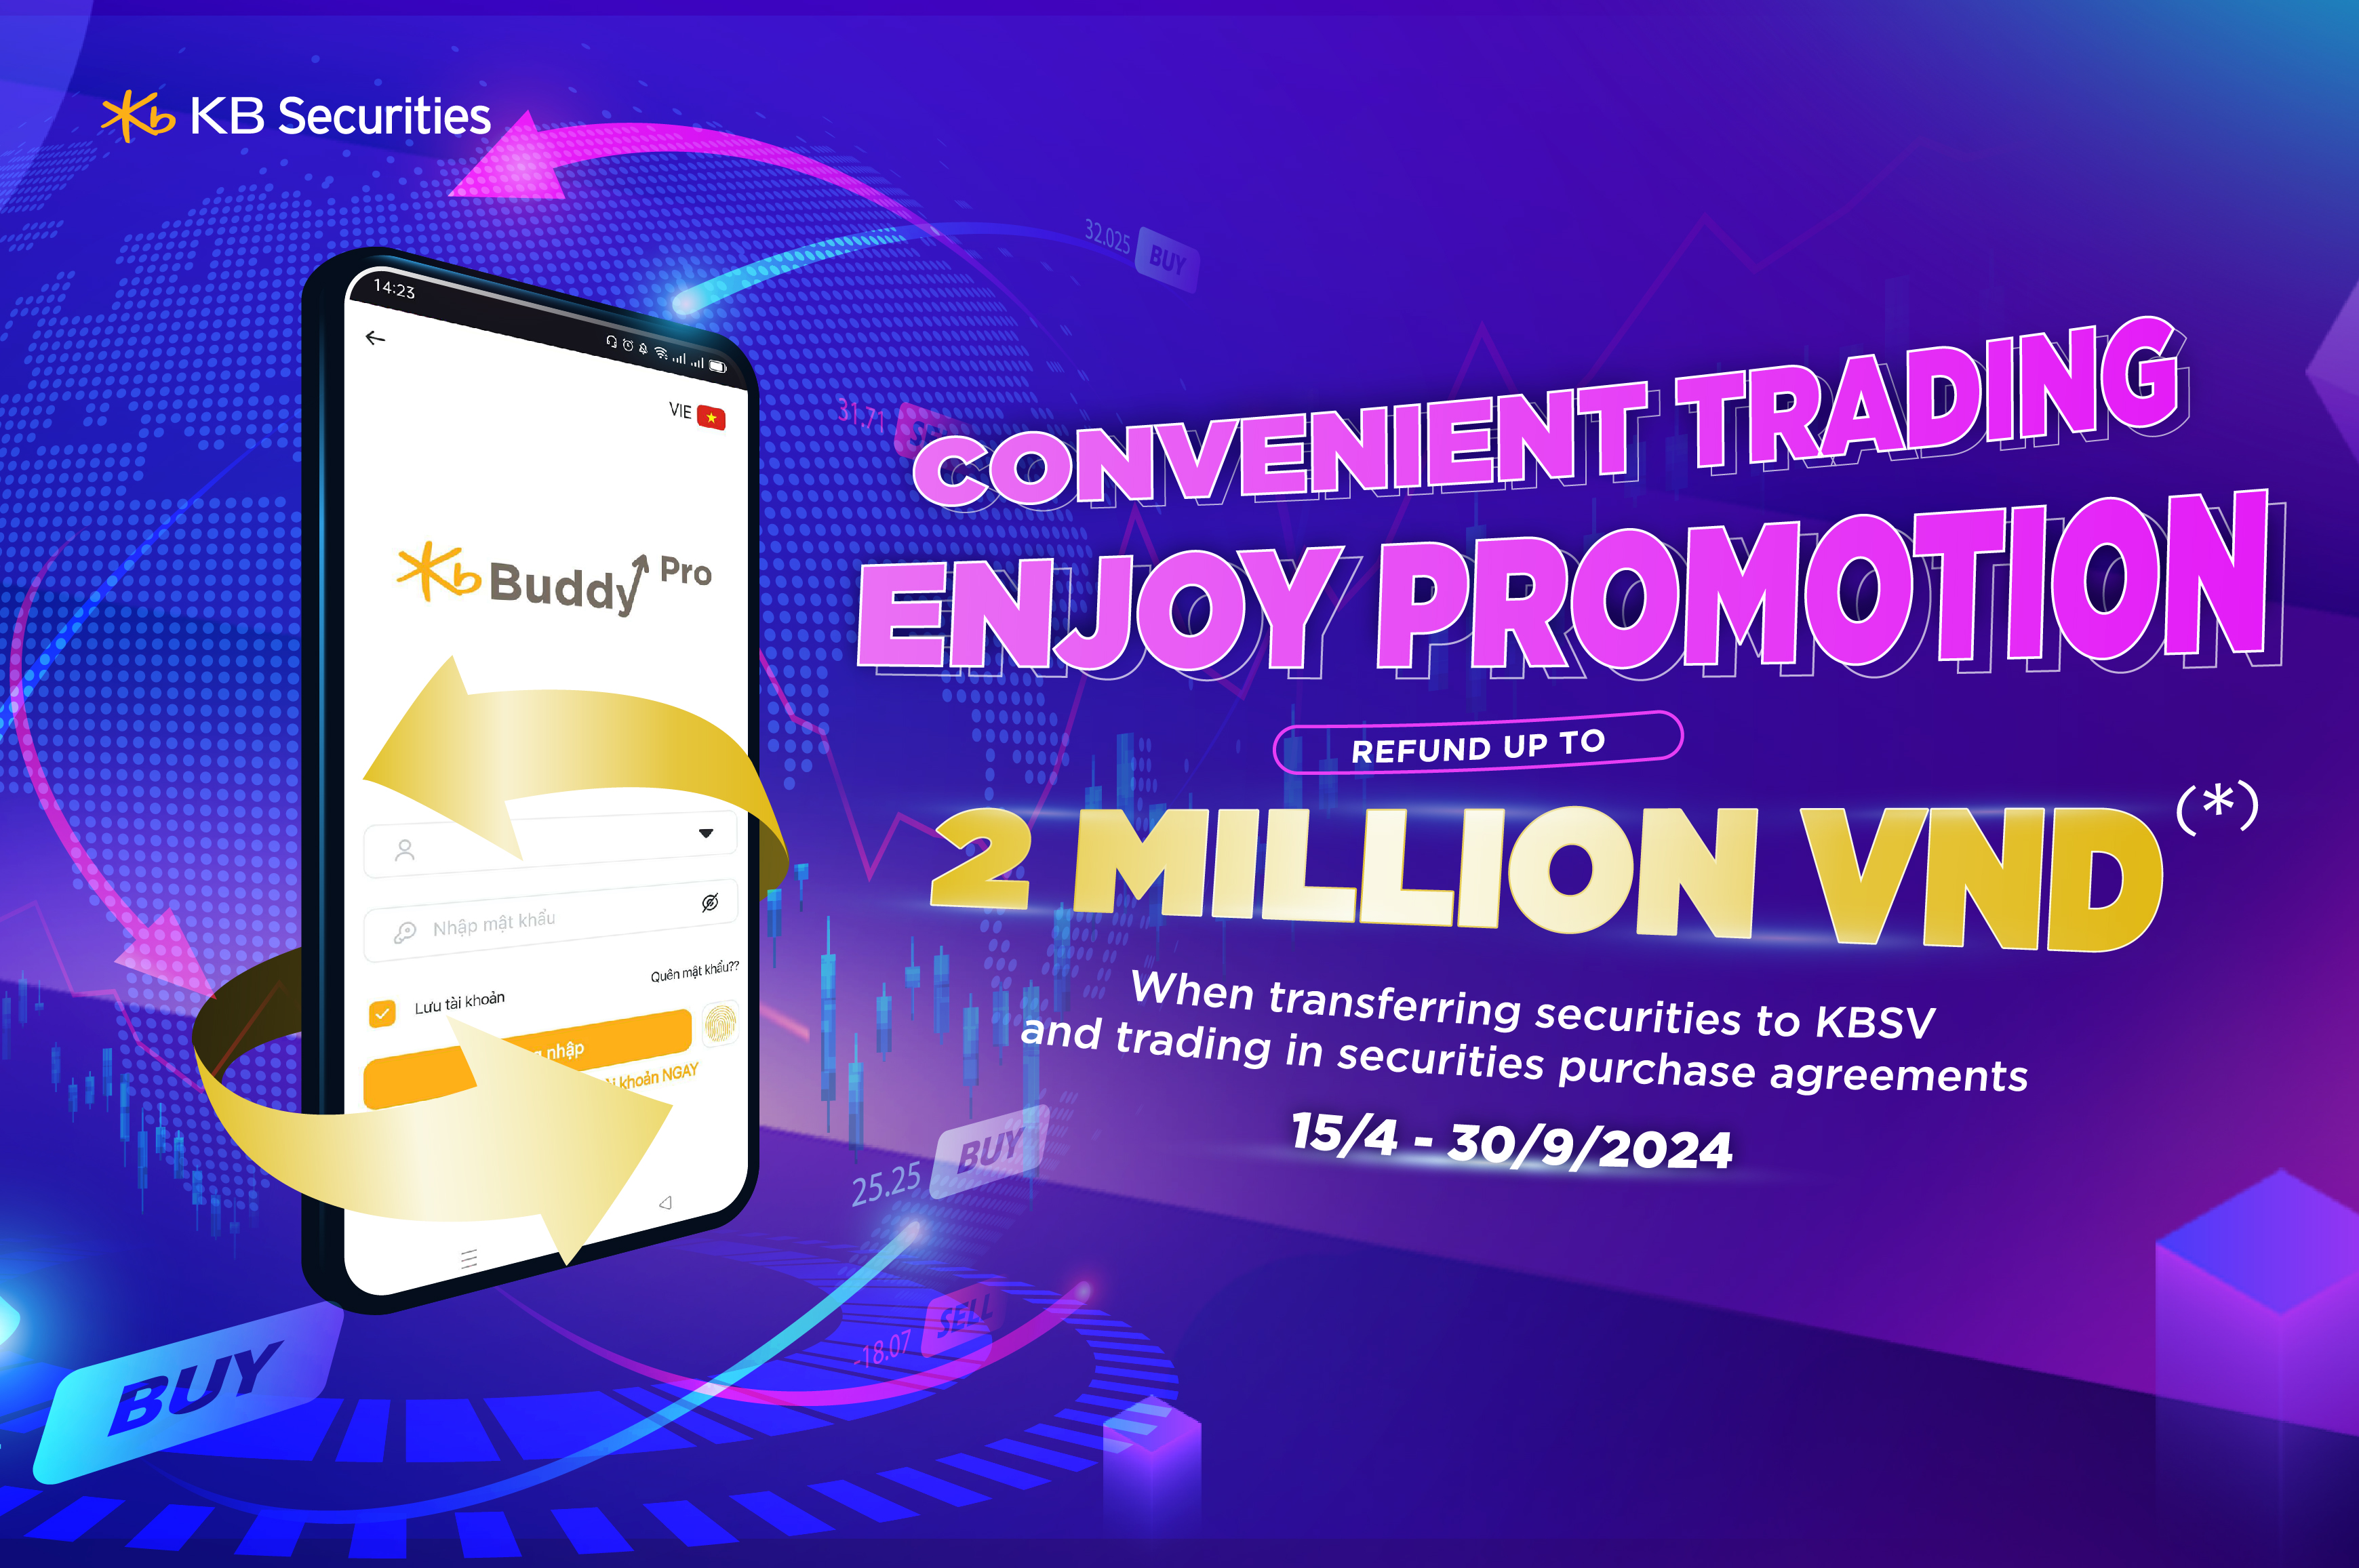 Refund up to 2 million VND when transferring securities to KBSV